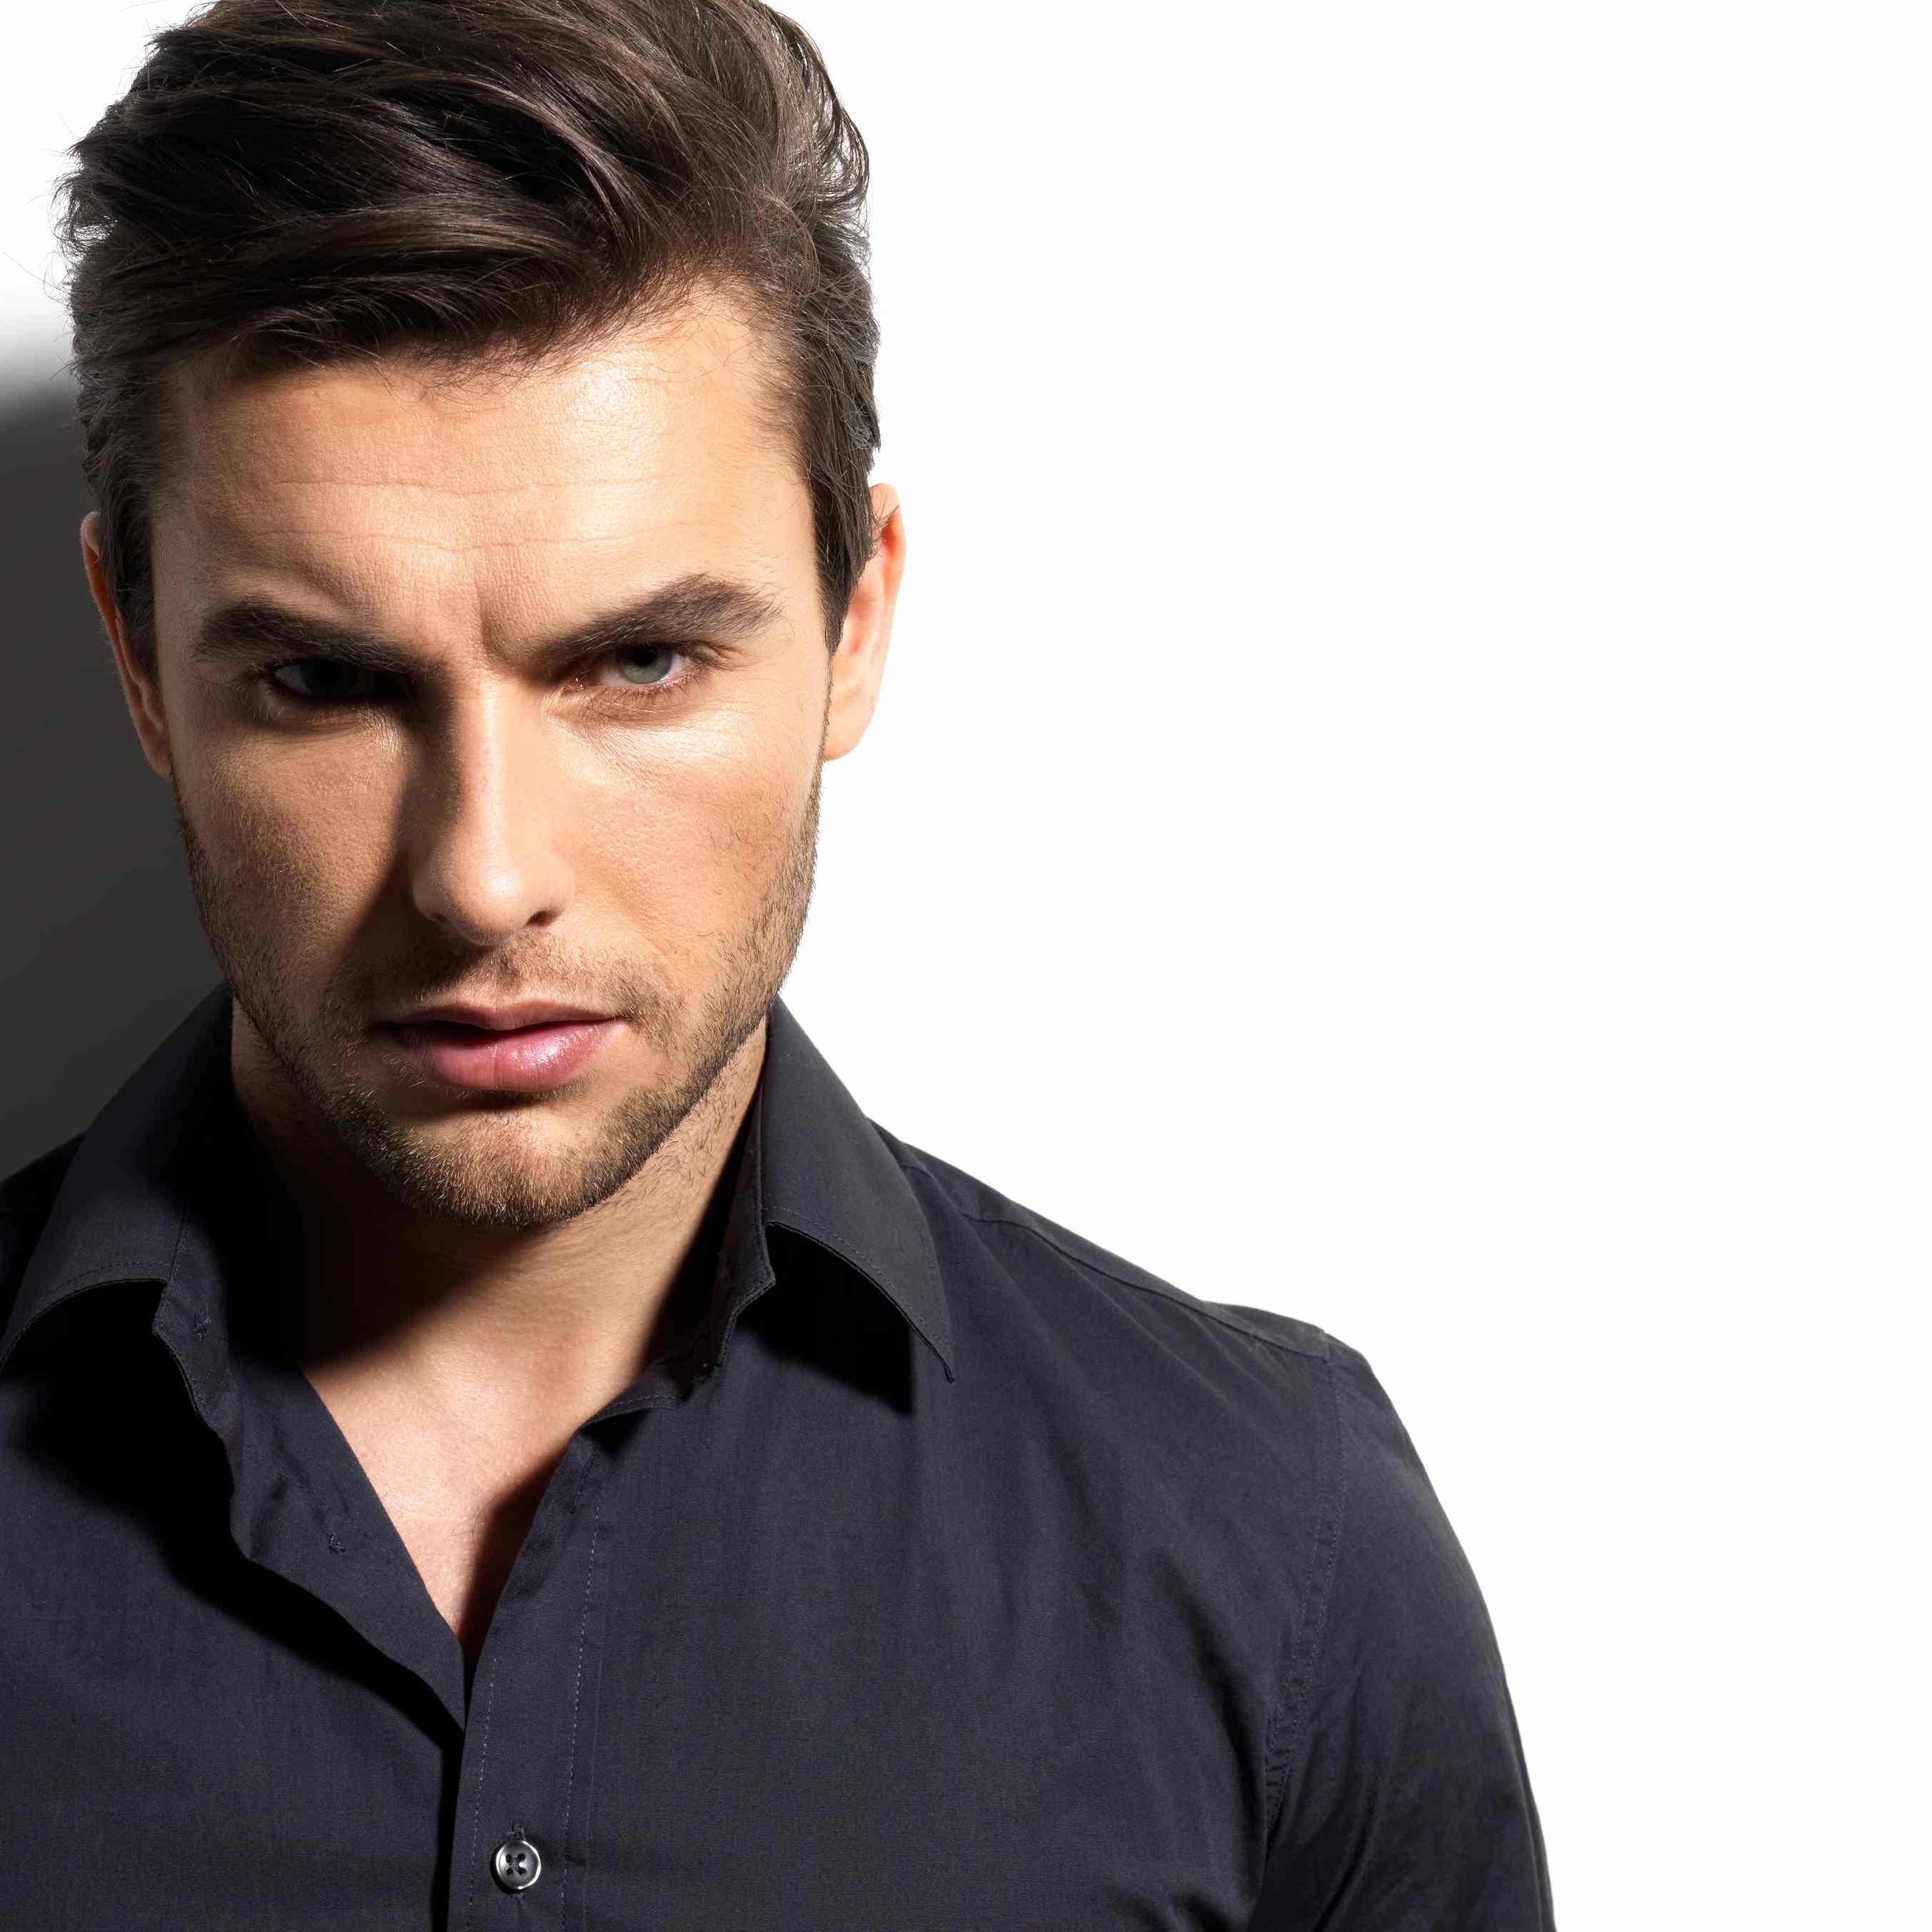 Men Hairstyle Clip Art Handsome Model PNG Transparent Background, Free  Download #26119 - FreeIconsPNG